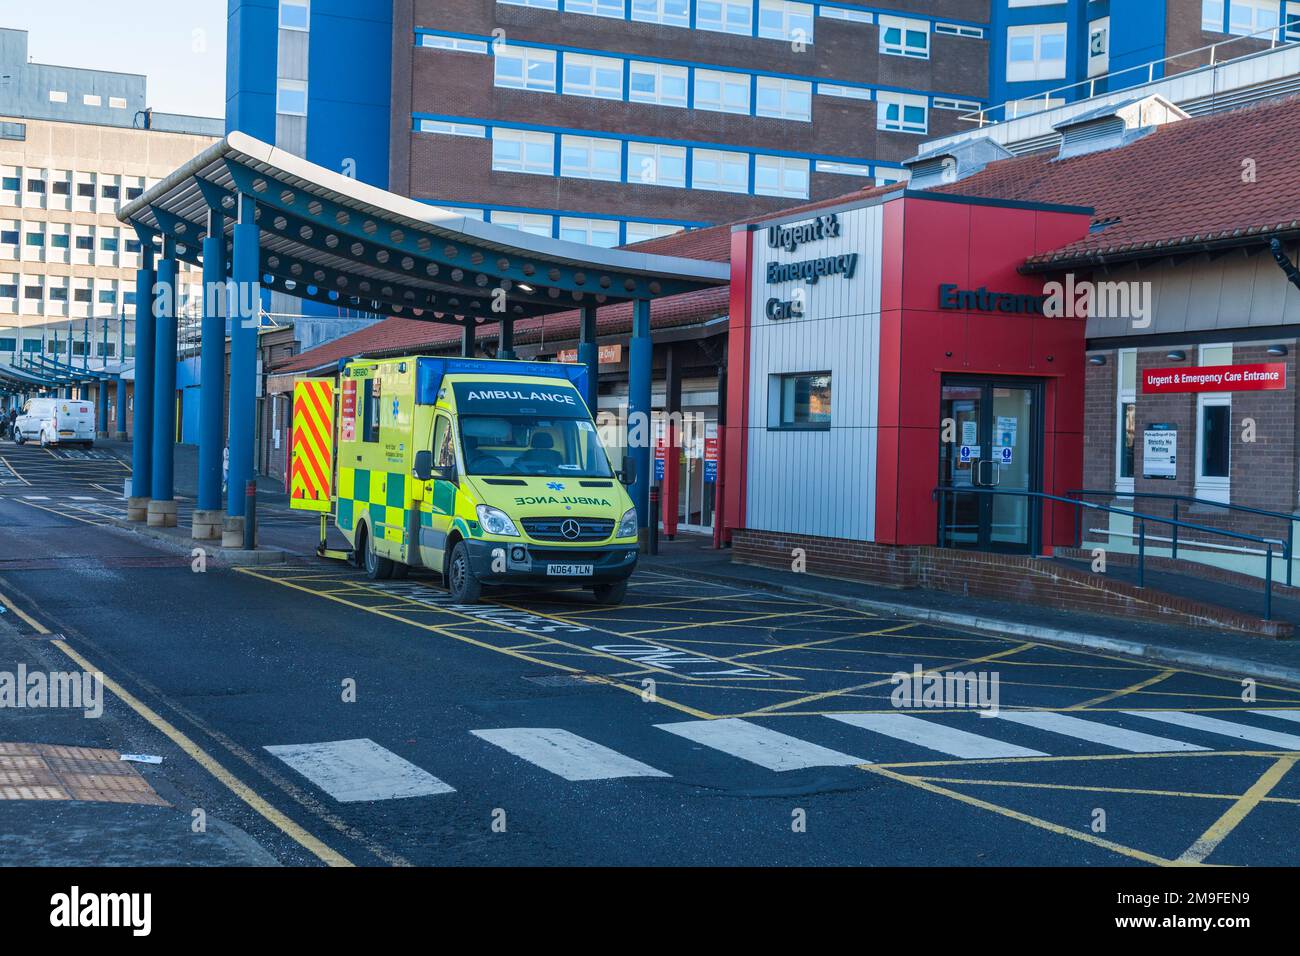 Stockton on Tees, UK. 18th January 2023.Nurses at South Tees NHS Hospital Trust have joined the National strike action but no sign of any striking nurses at North Tees Hospital today. David Dixon, Alamy Stock Photo